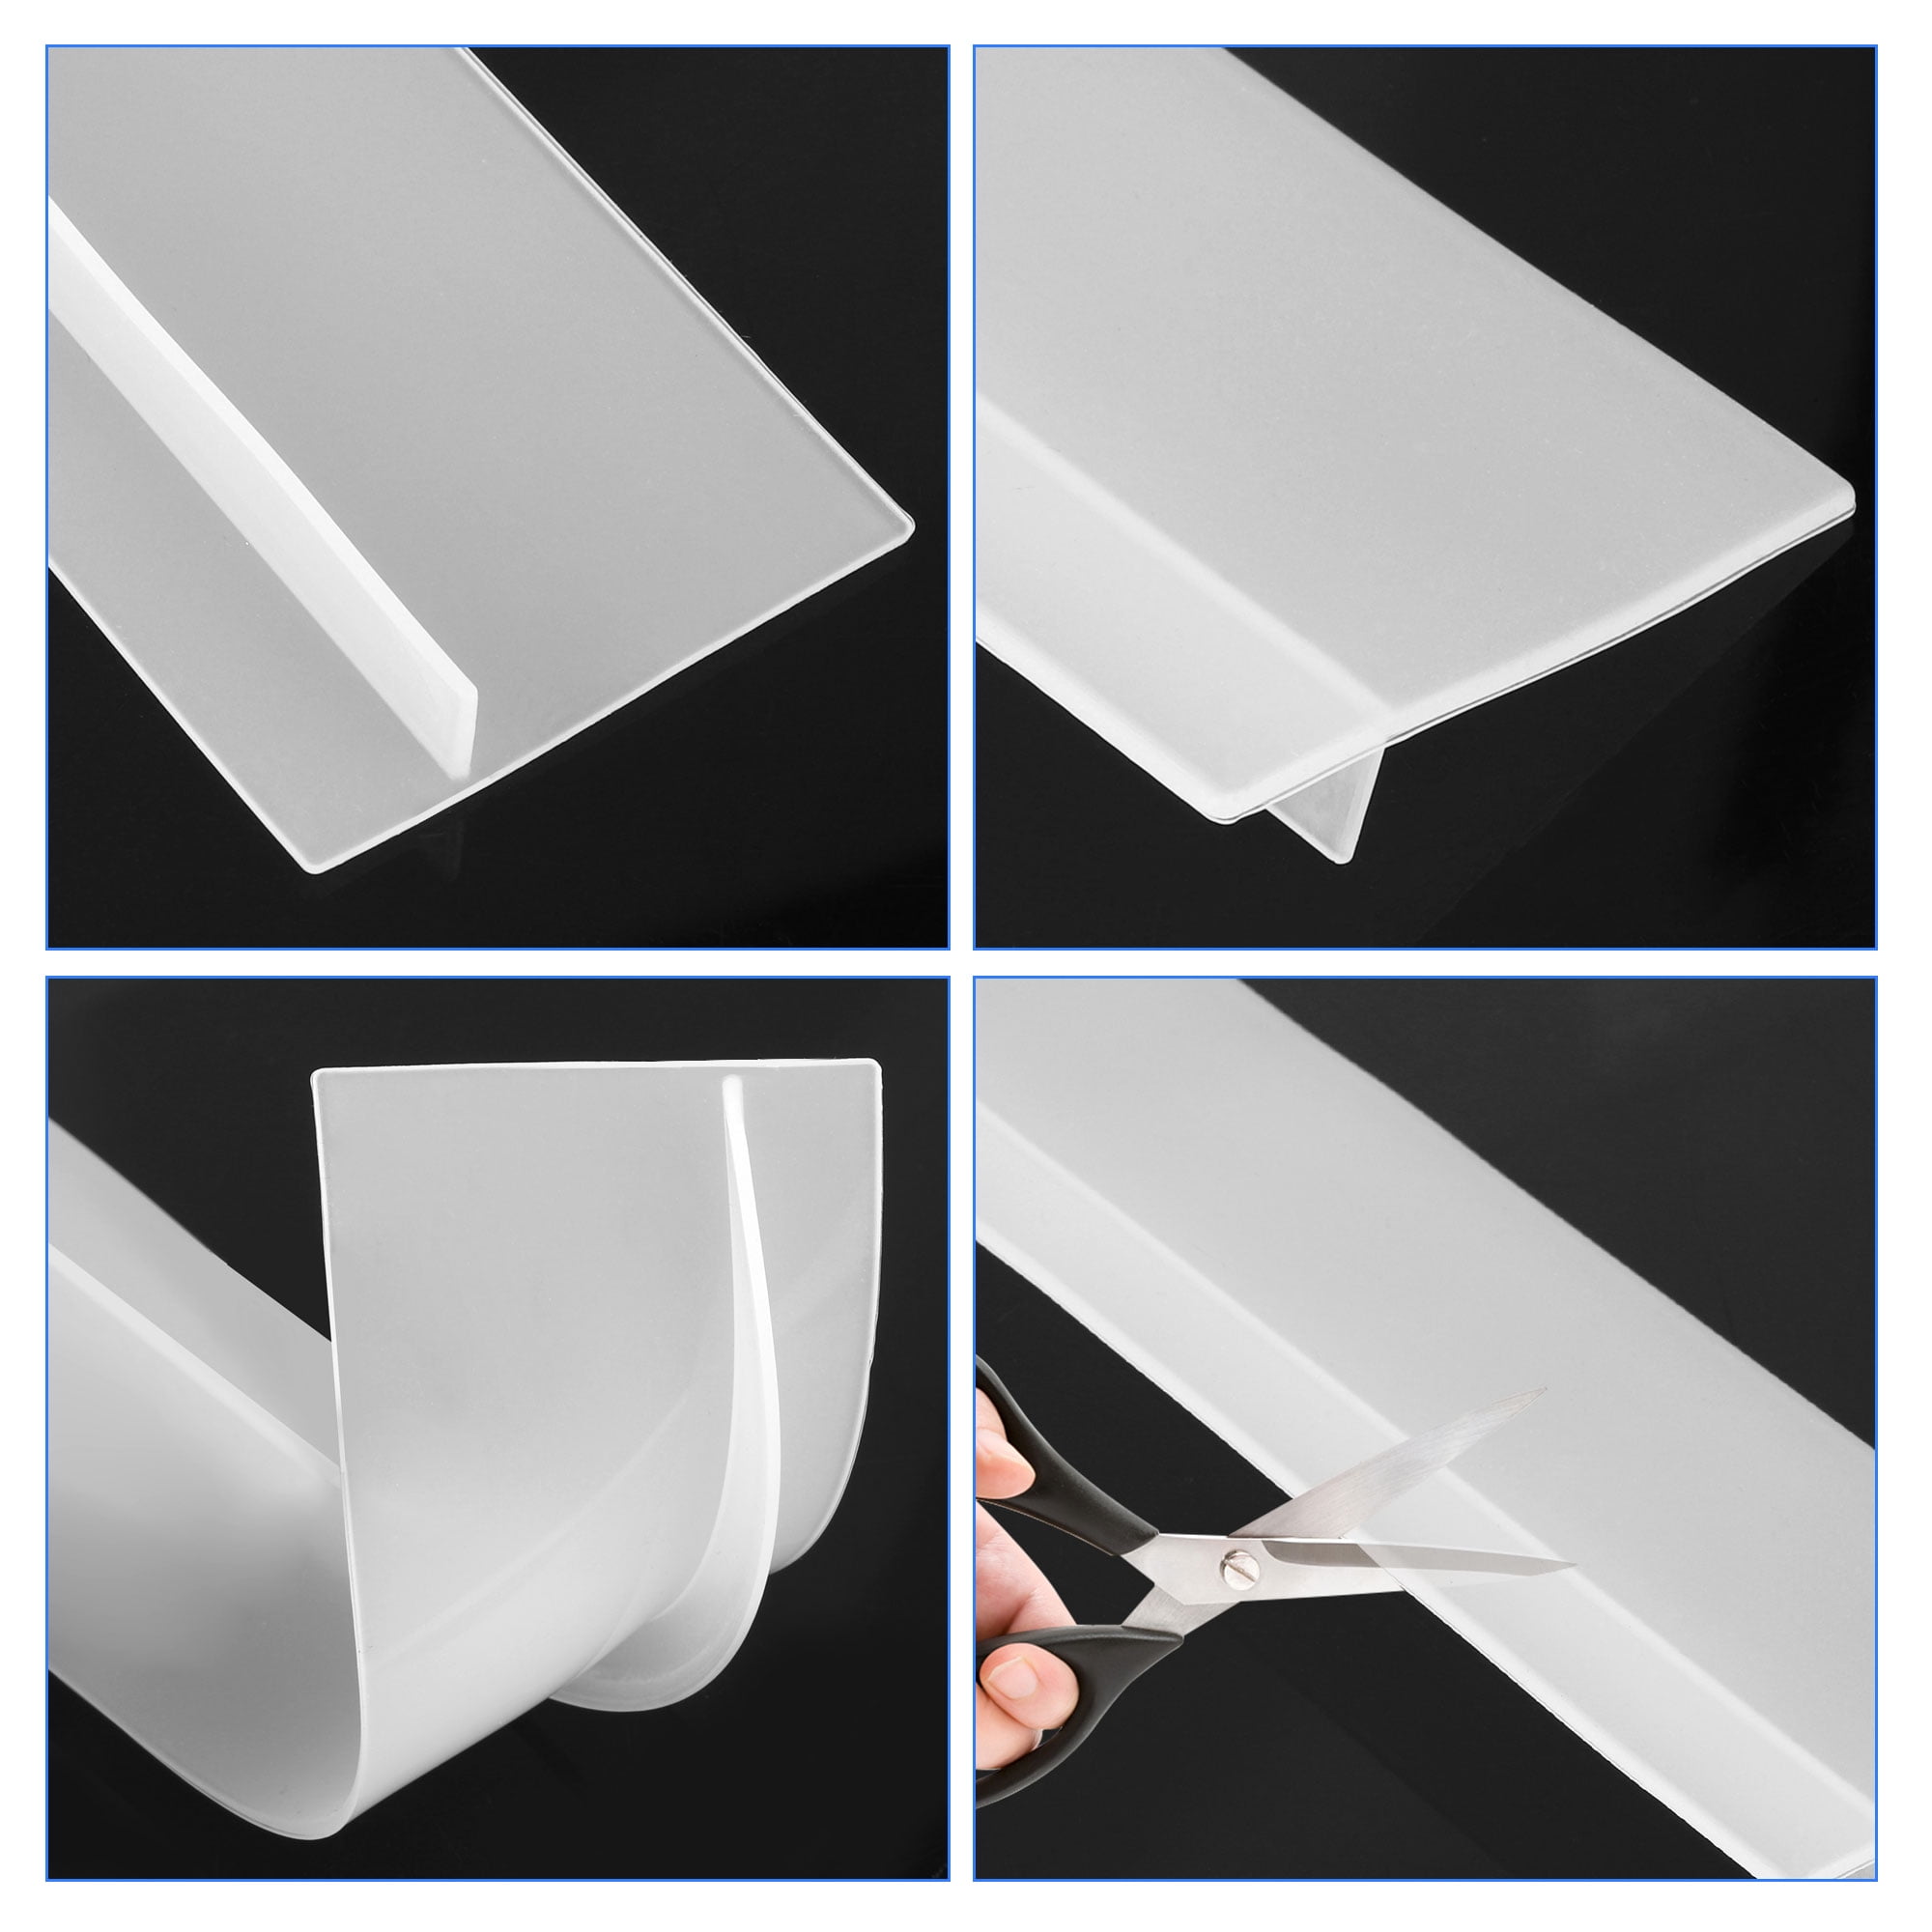 T-Shape Silicone Stove Cover Gap Filler Sealing Spills Between Kitchen  Counter Wbb12021 - China Sealer and Filler price